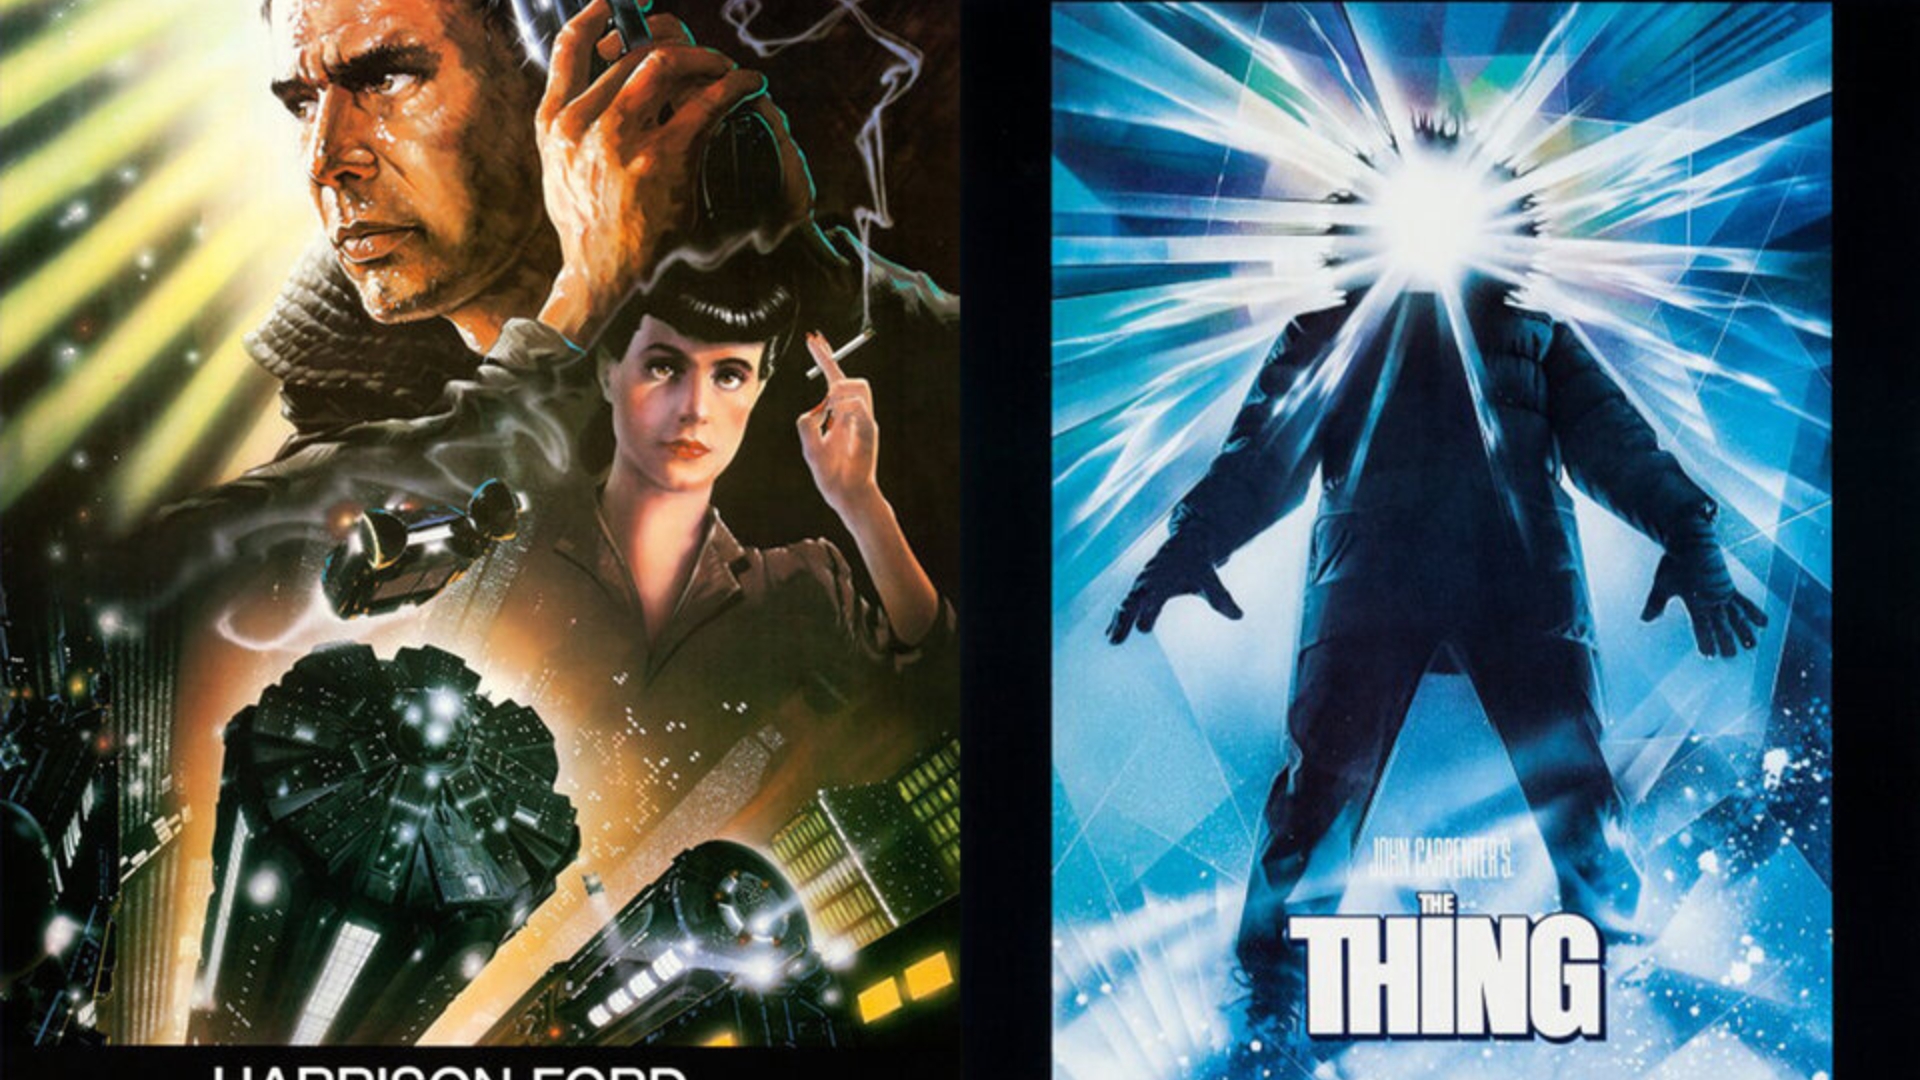 Blade Runner / The Thing